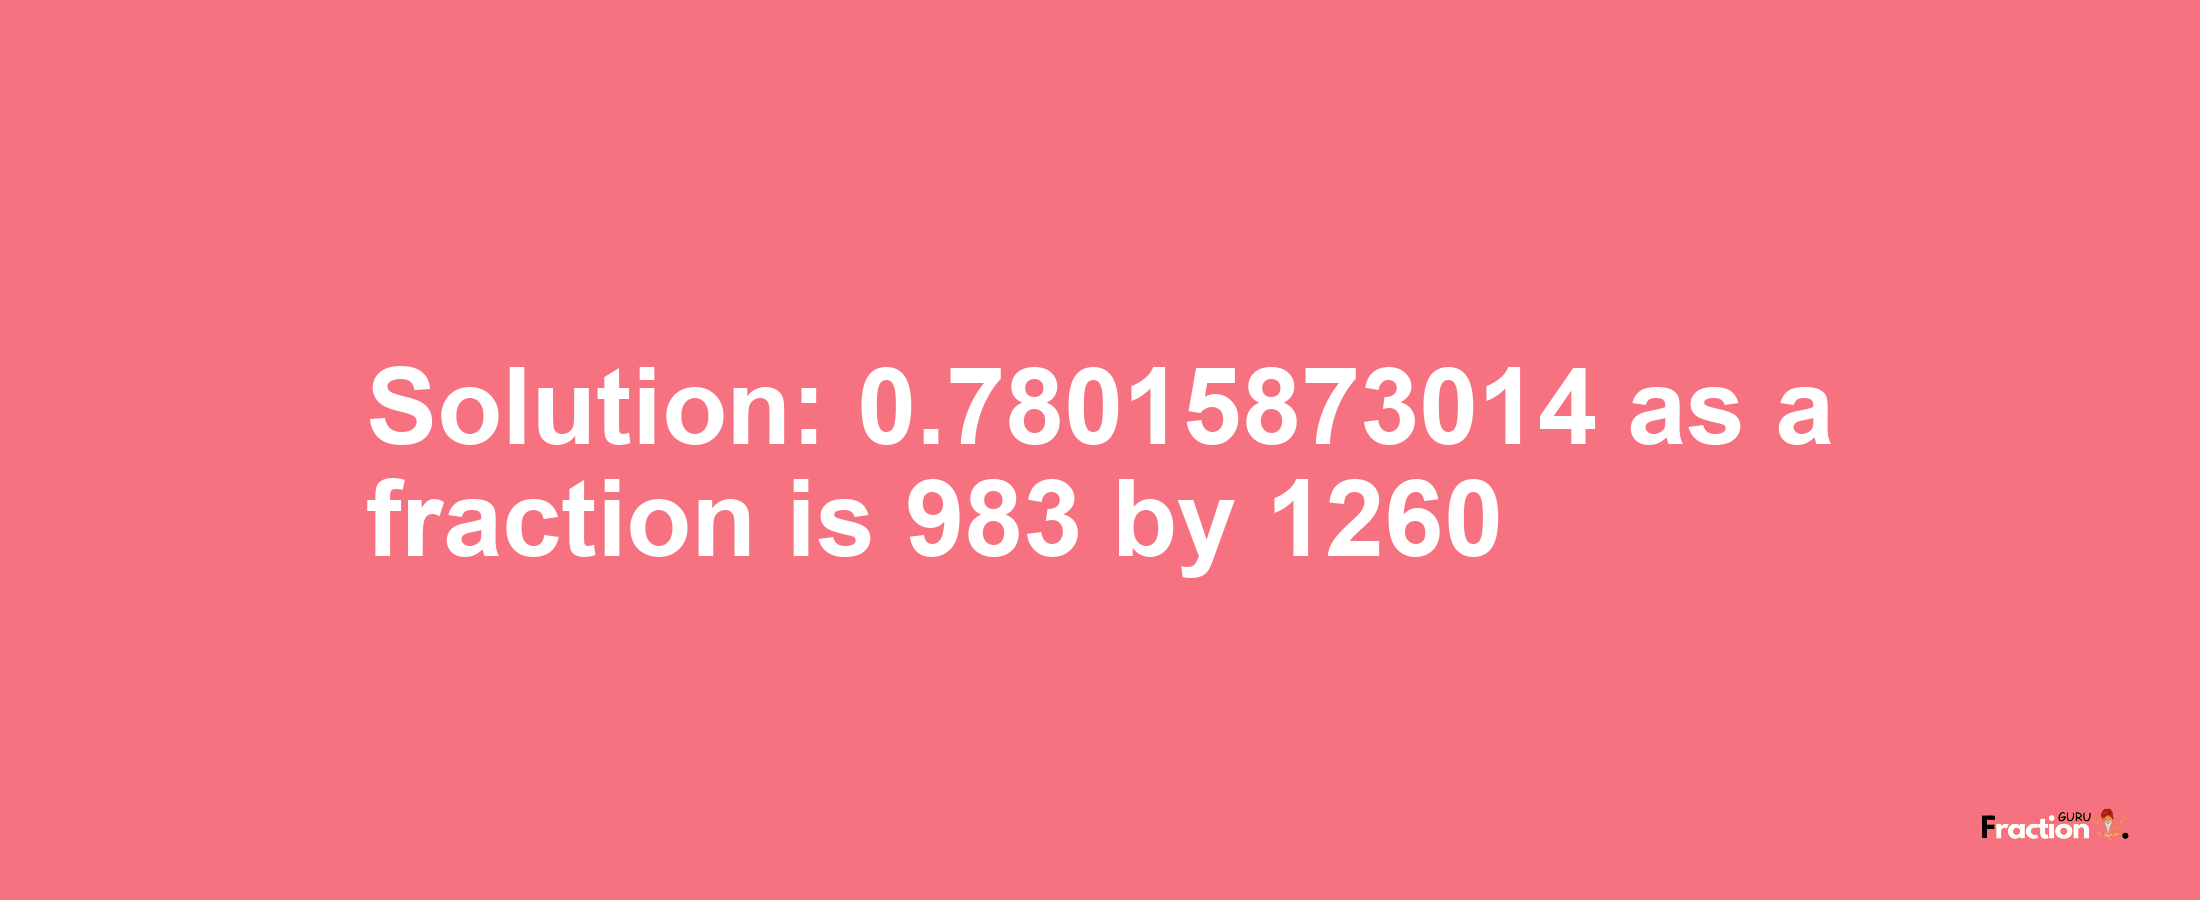 Solution:0.78015873014 as a fraction is 983/1260